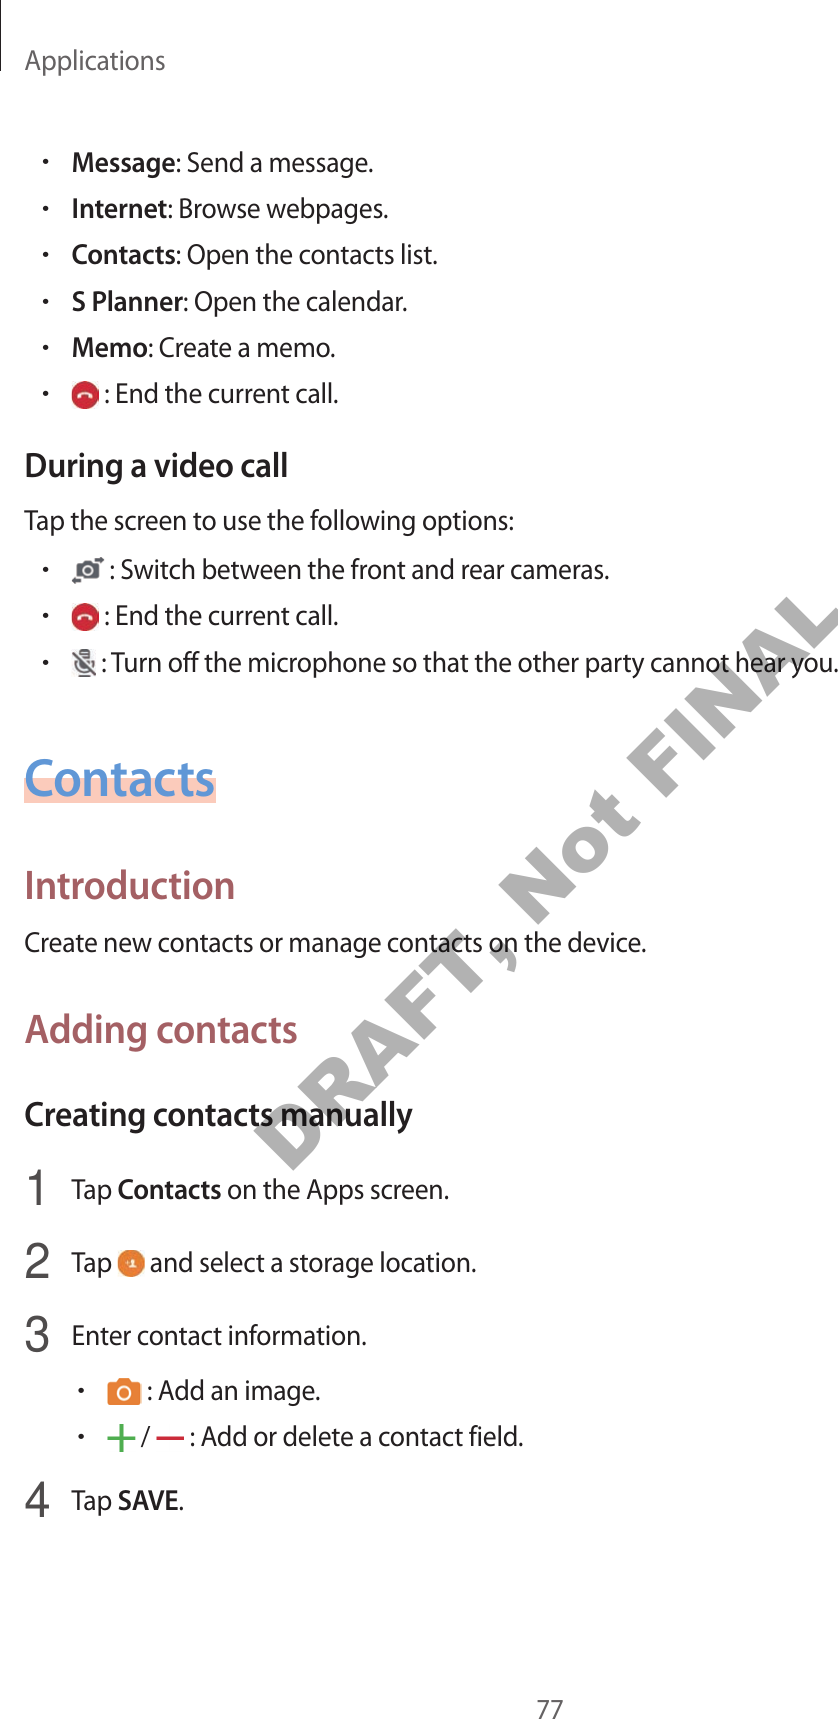 Applications77•Message: Send a message.•Internet: Browse webpages.•Contacts: Open the contacts list.•S Planner: Open the calendar.•Memo: Create a memo.• : End the current call.During a video callTap the screen to use the following options:• : Switch between the front and rear cameras.• : End the current call.• : Turn off the microphone so that the other party cannot hear you.ContactsIntroductionCreate new contacts or manage contacts on the device.Adding contactsCreating contacts manually1  Tap Contacts on the Apps screen.2  Tap   and select a storage location.3  Enter contact information.• : Add an image.• /   : Add or delete a contact field.4  Tap SAVE.DRAFT, Not FINAL